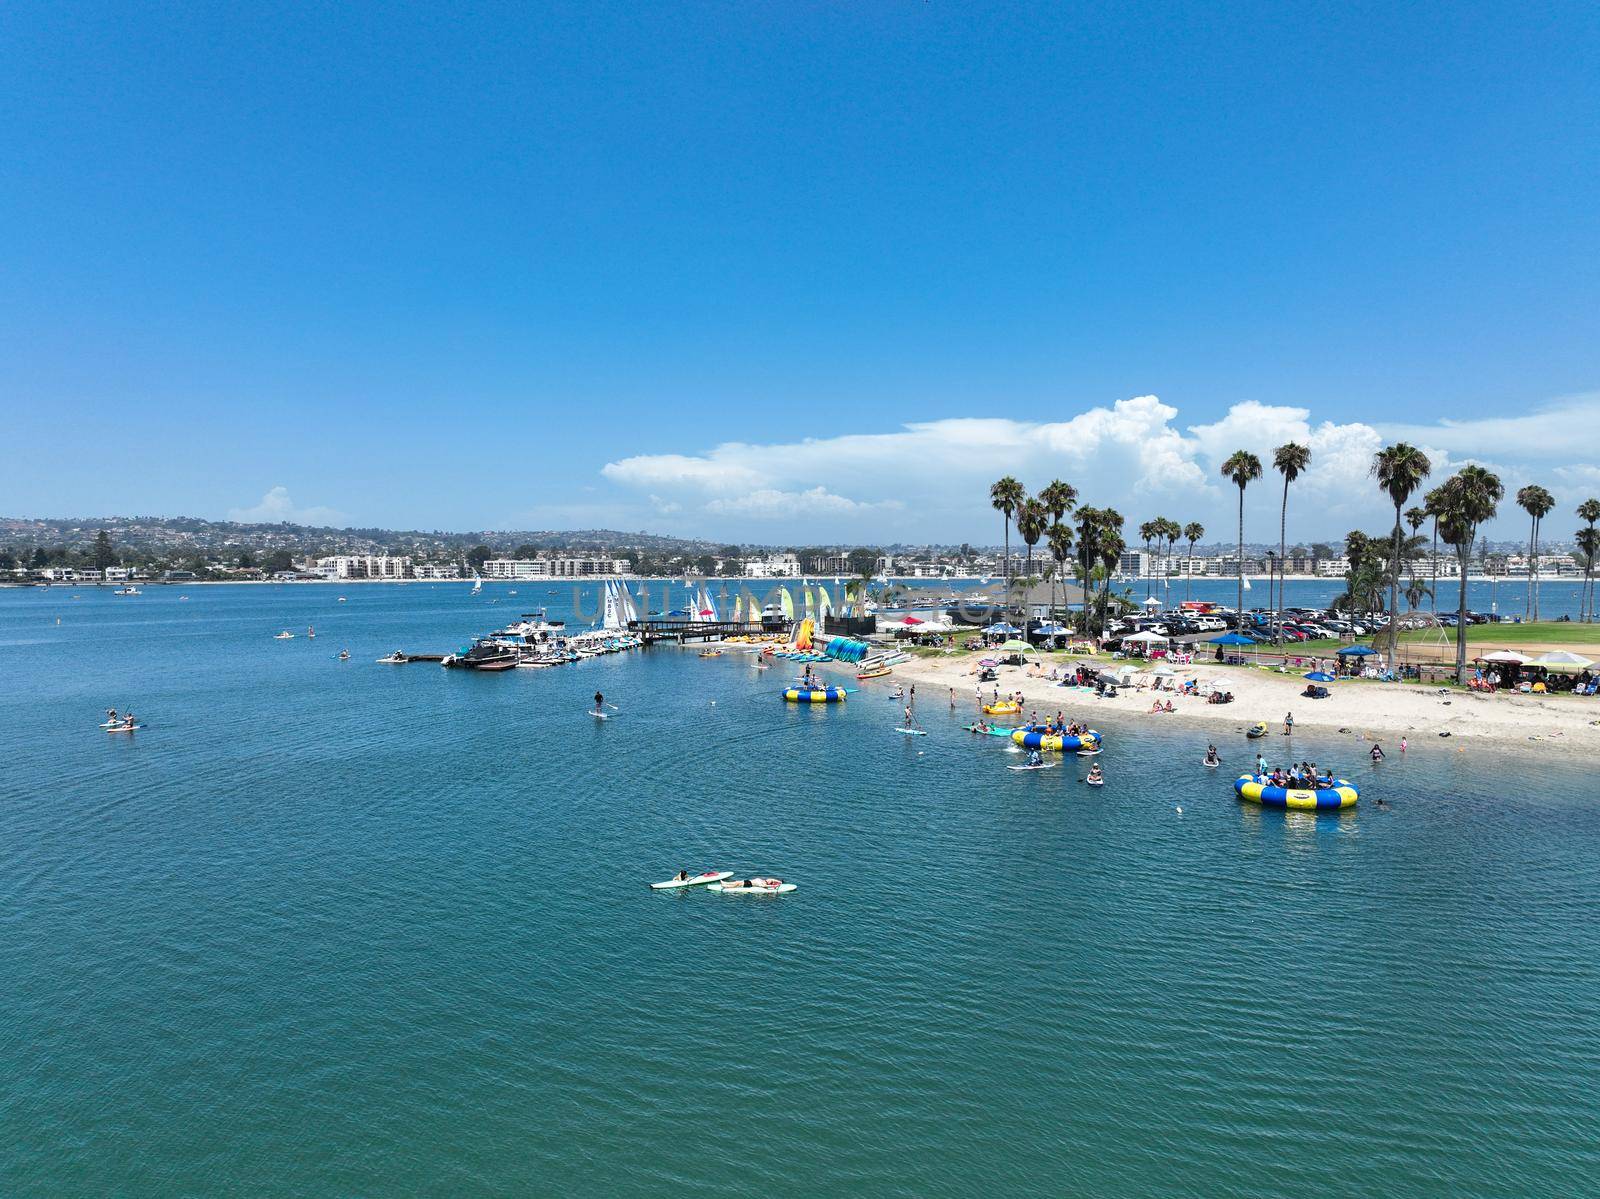 Aerial view of Mission Bay water sports zone in San Diego. Famous tourist destination, California. USA. August 22nd, 2022